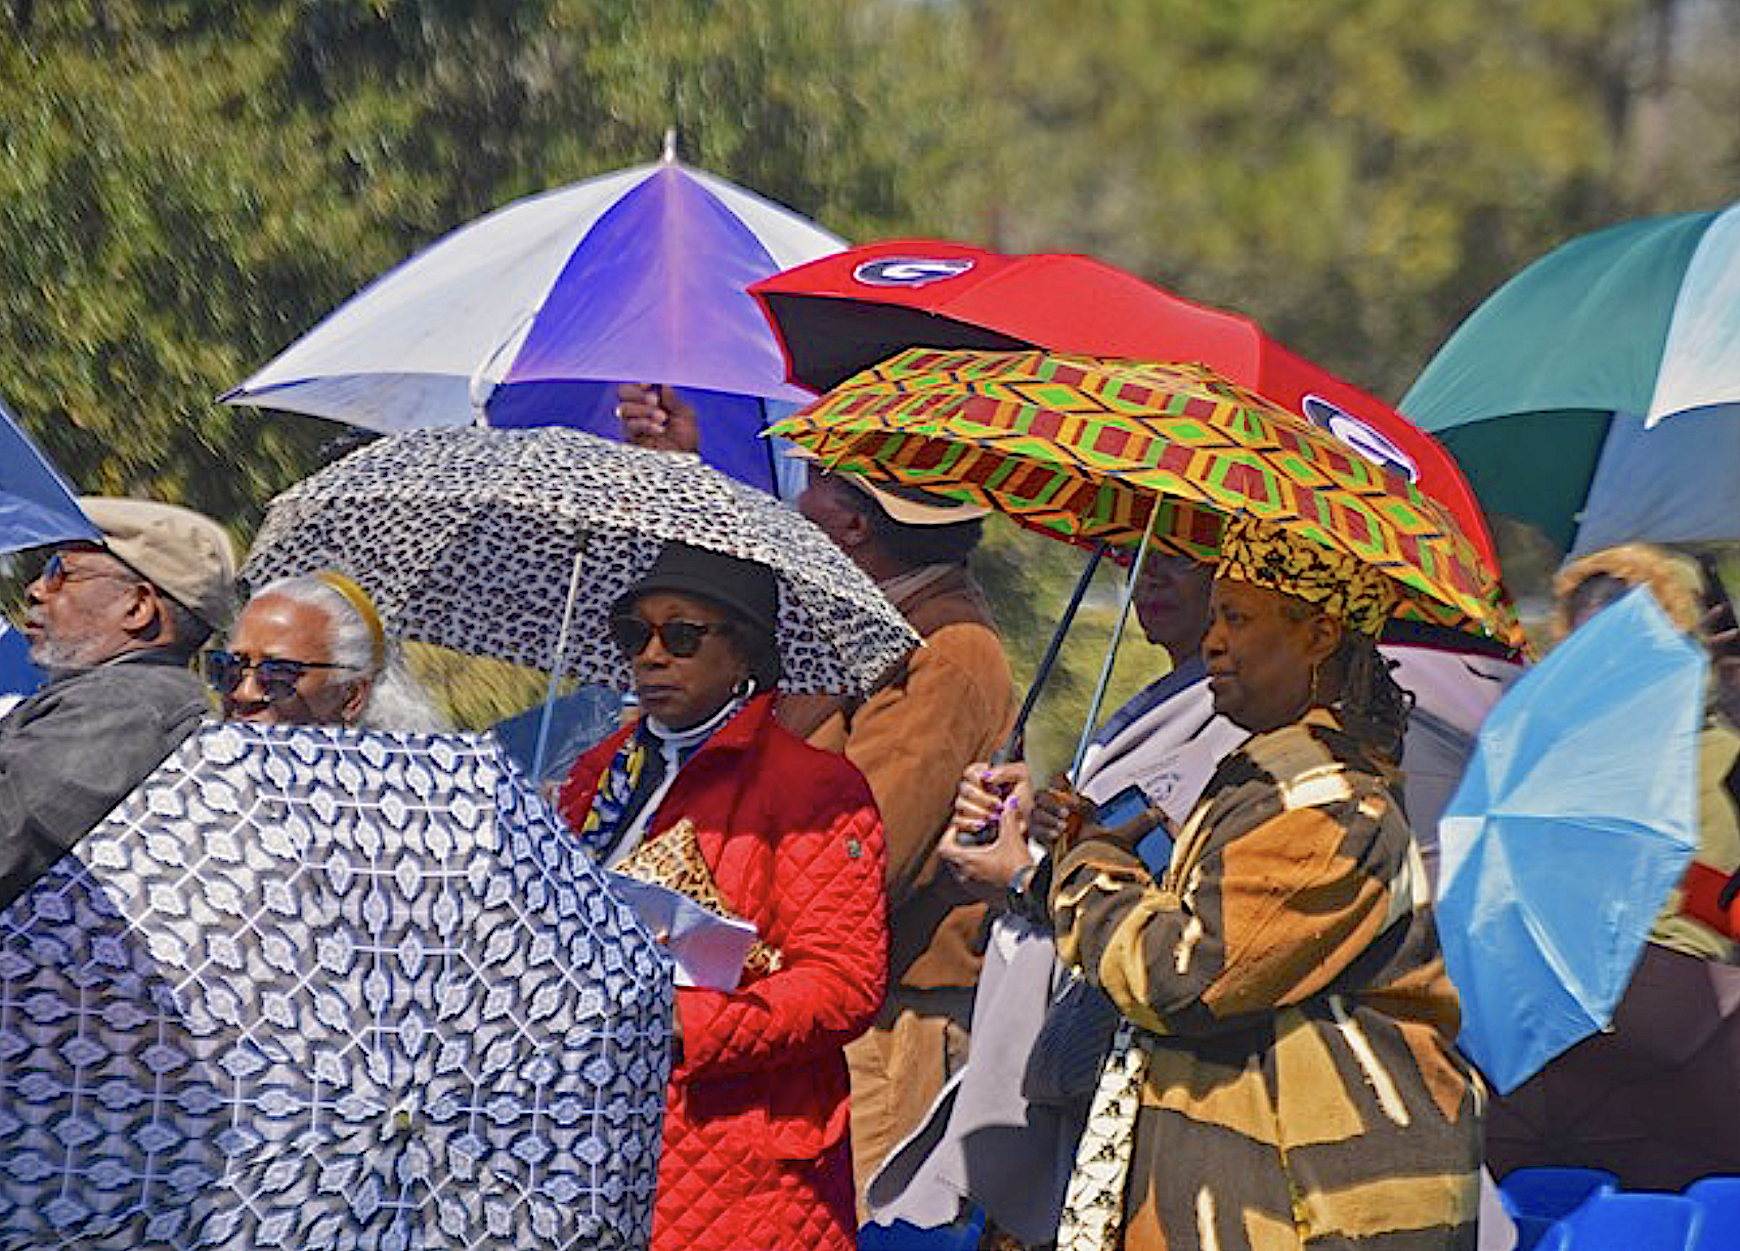 Through “Weeping Time” ceremonies like this, the Gullah/Geechee preserve the history of an infamous 2-day slave auction — the largest ever in Georgia — when a wealthy owner splintered families and friends during a torrential downpour, all to cover his gambling debts. Credit: NPS.